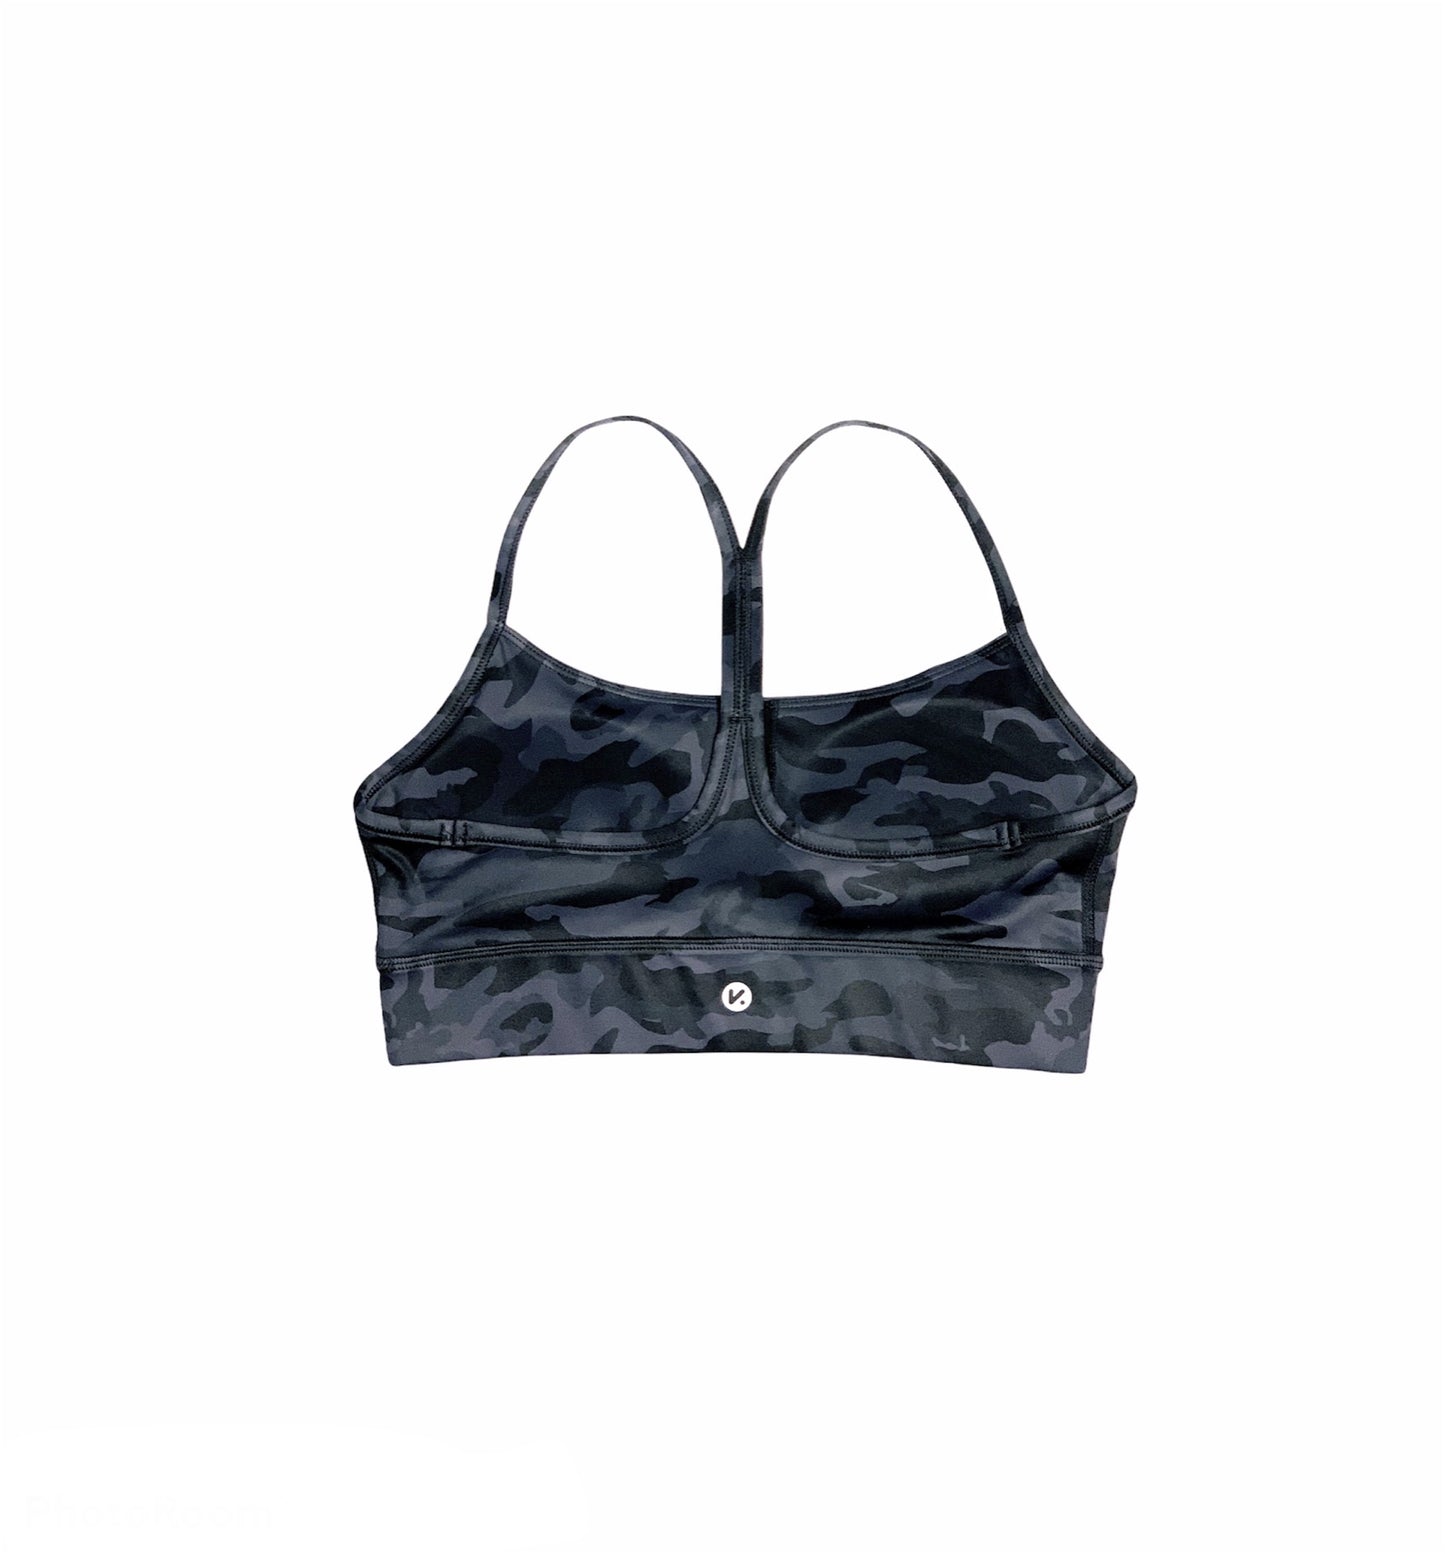 Aspire Sports Bra - Black Camouflage, for A–C Cups